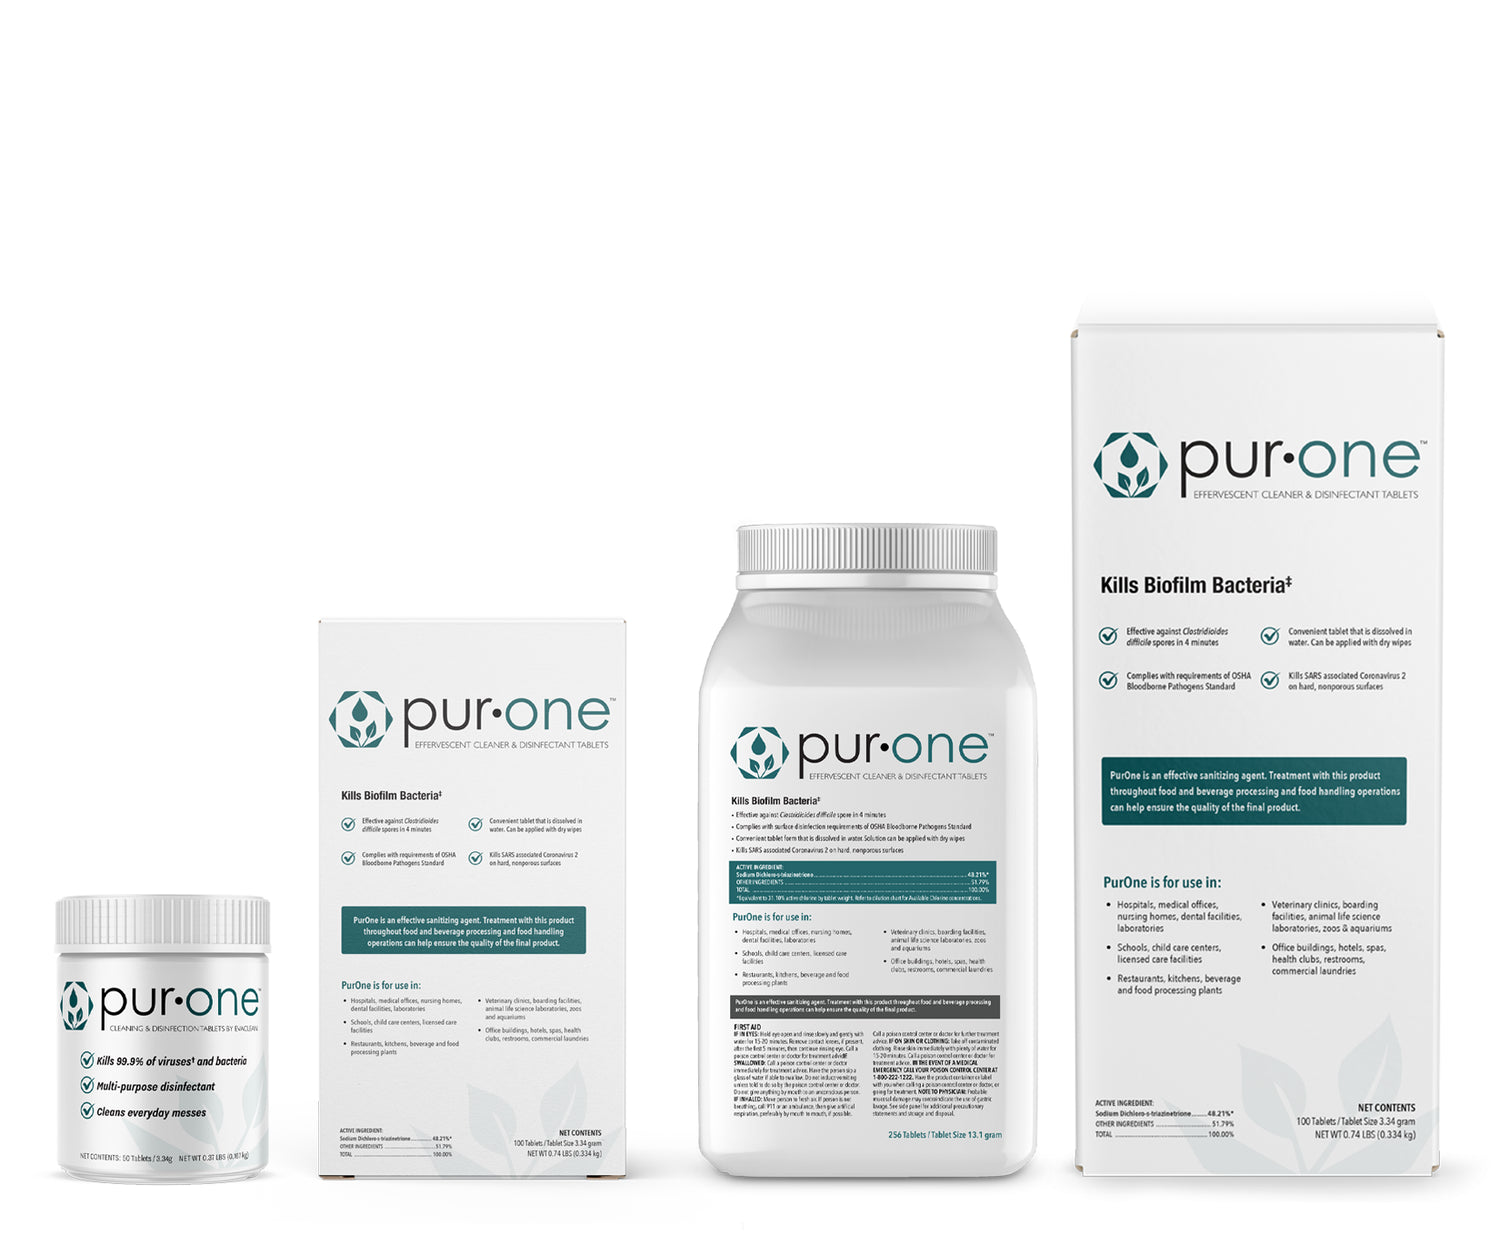 image of all four sizes of PurOne packaging